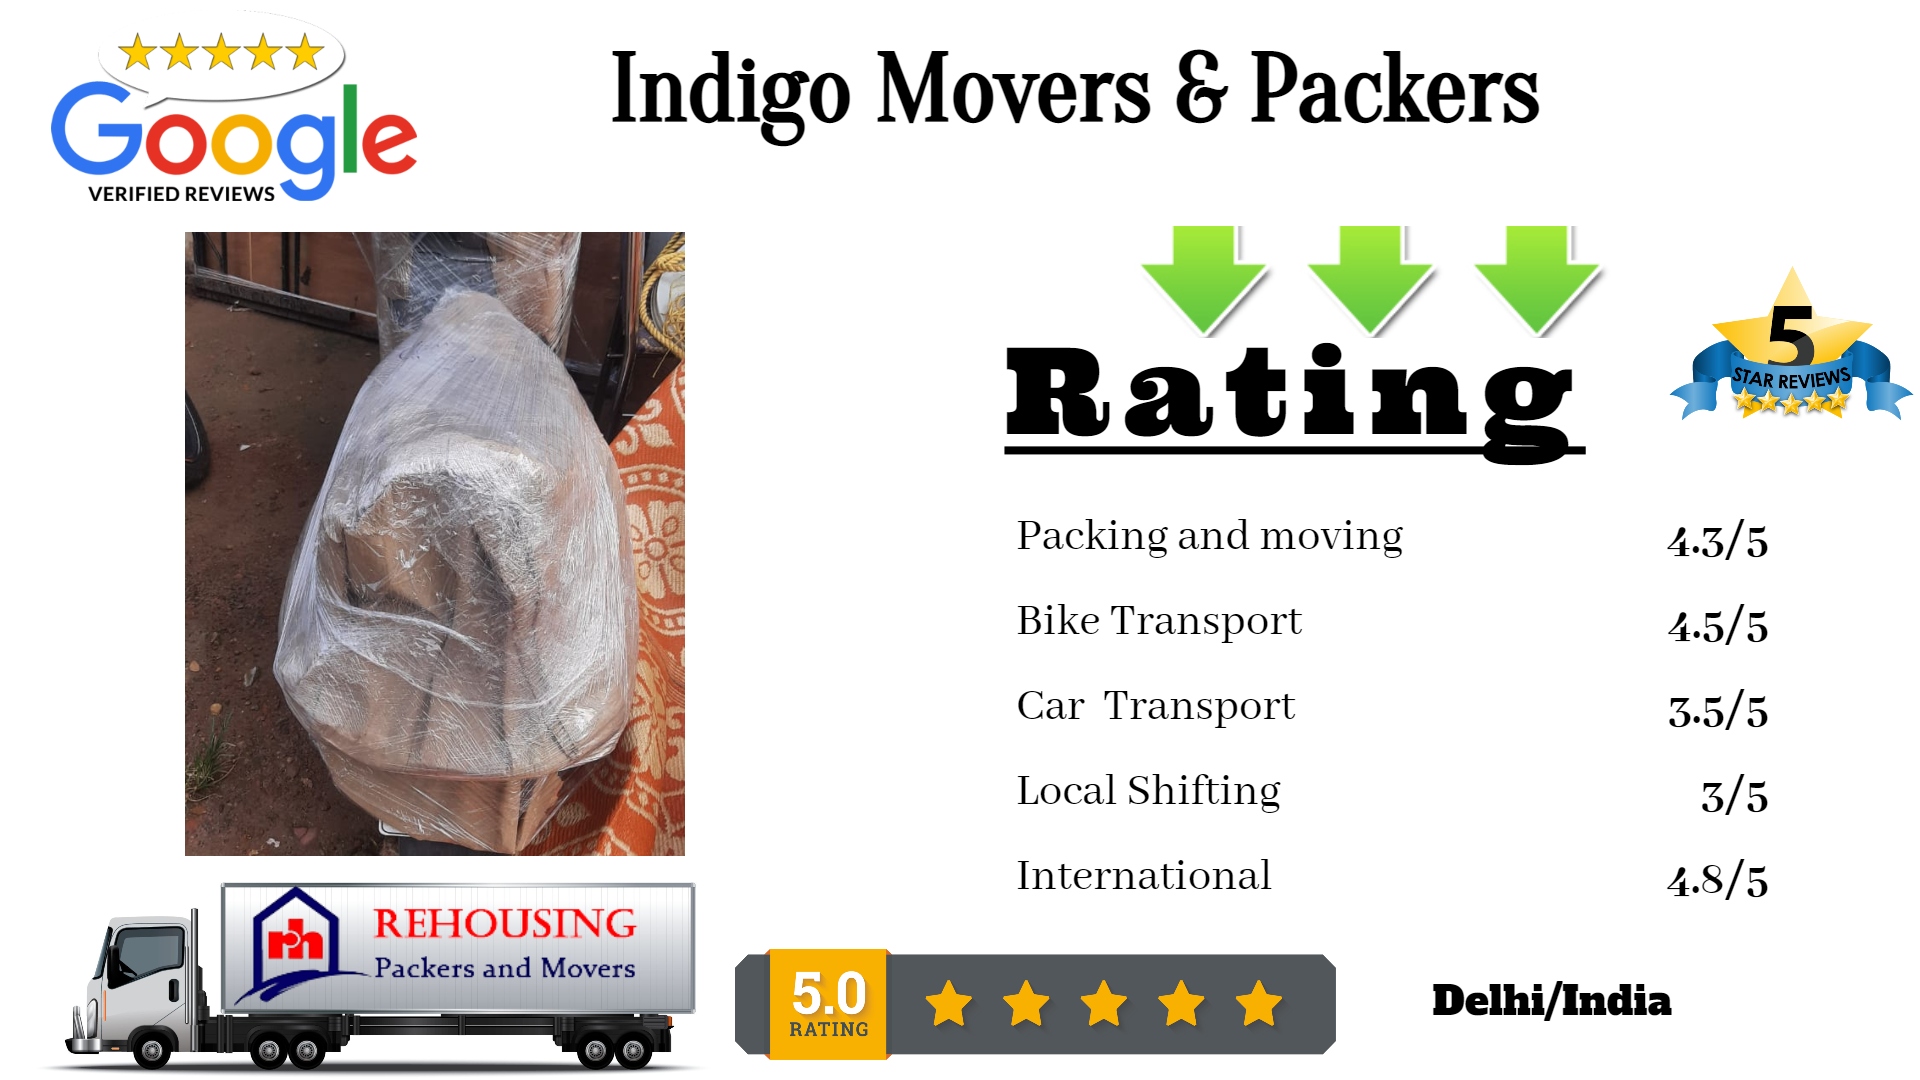 Indigo Movers & Packers South-West Delhi, 110037